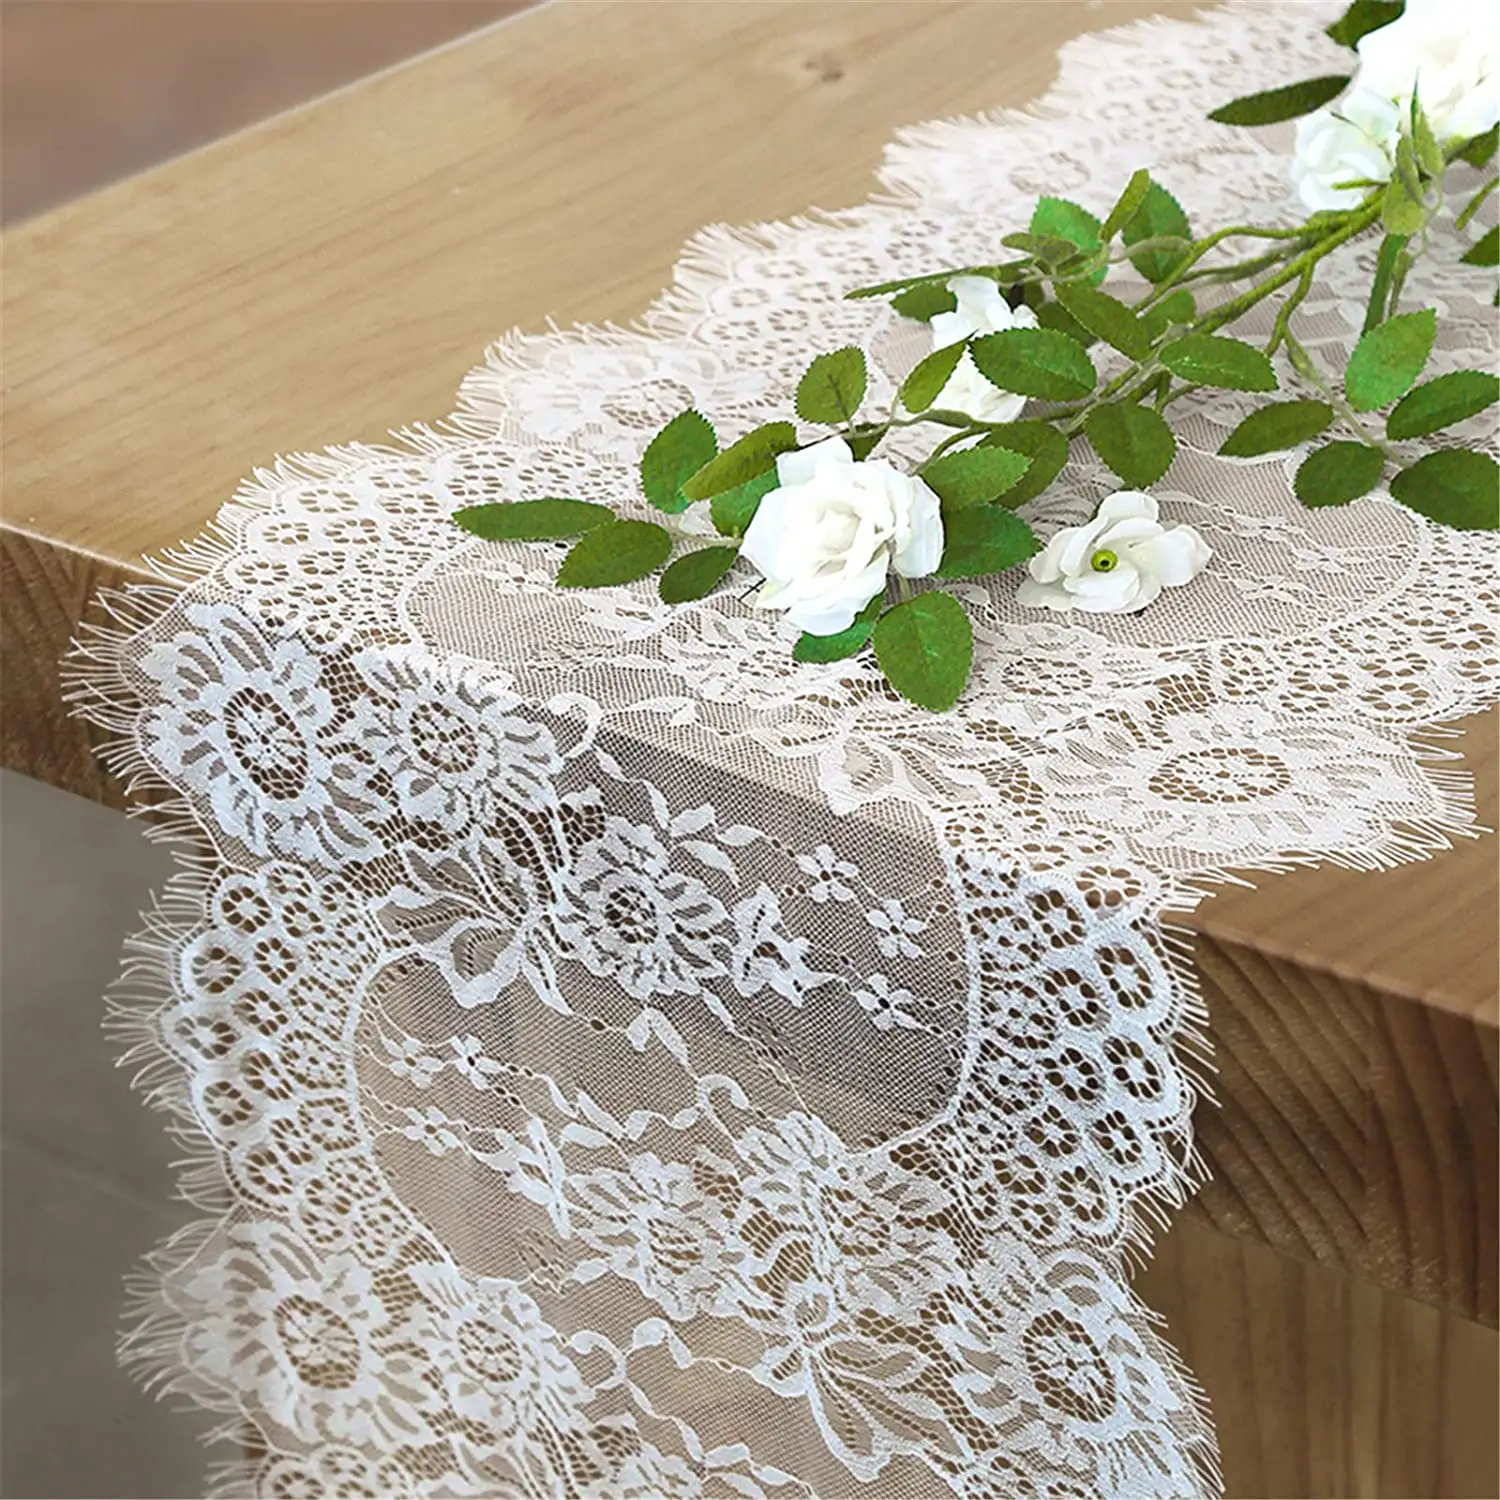 14 X120 Inch Luxury Vintage Wedding Party White Exquisite Decor Rustic Chic Rose Floral Lace Table Runner